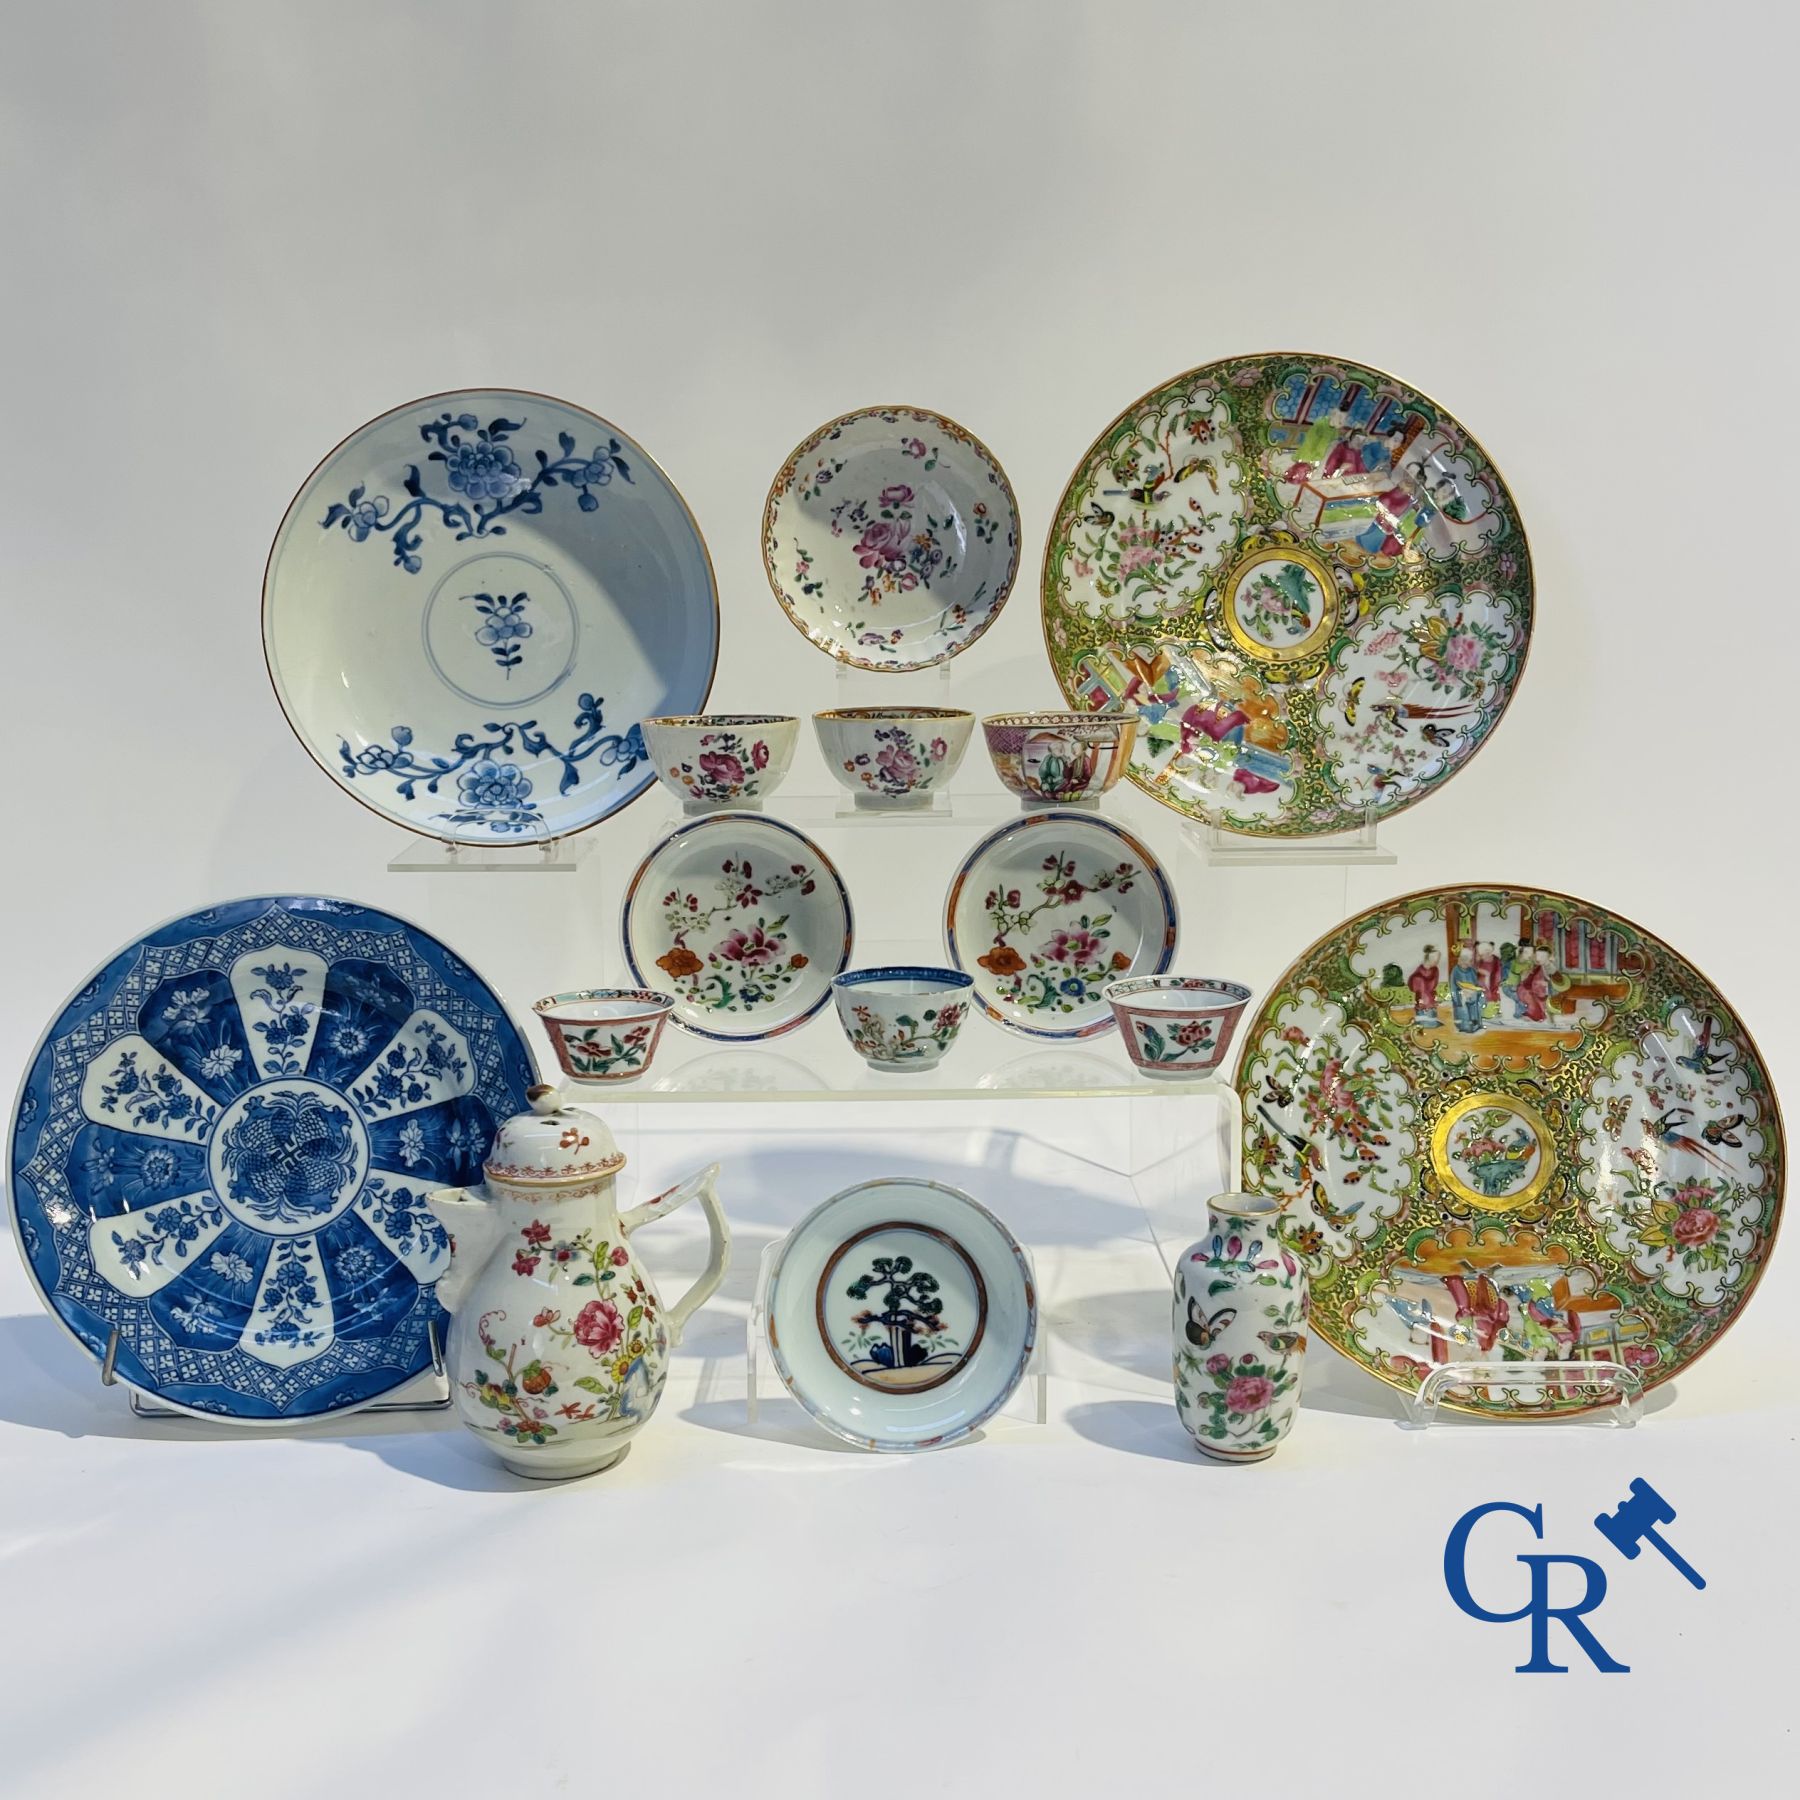 Chinese porcelain: 16 pieces of 18th and 19th century Chinese porcelain.